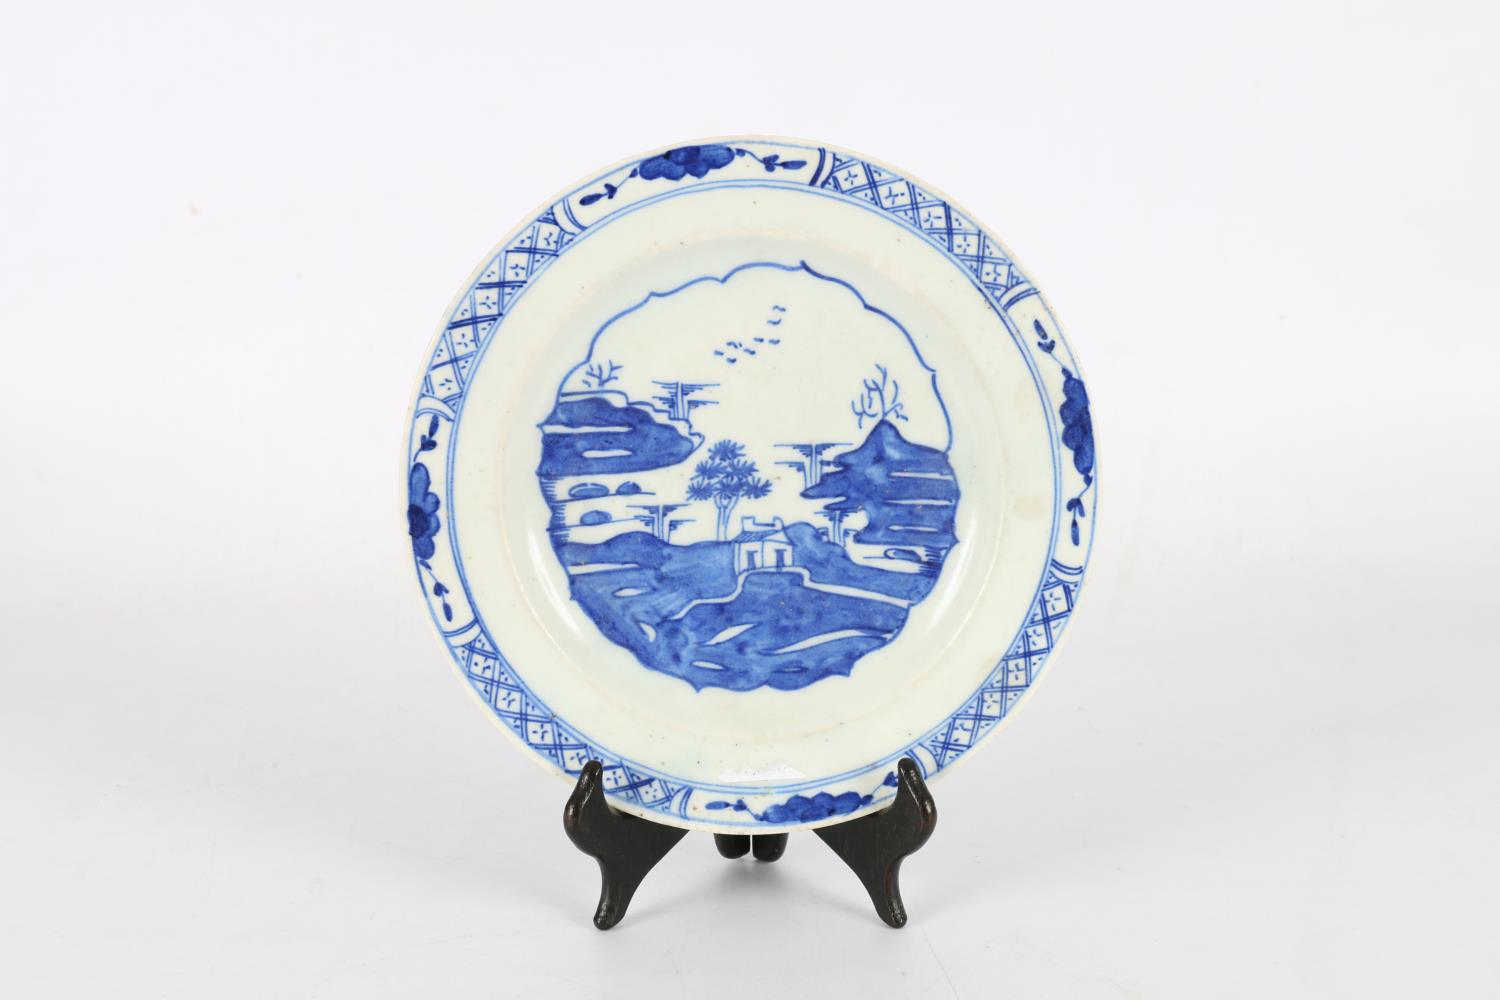 Mid 18th century Bow blue and white plate with central Chinese pavilion pattern within a lotus